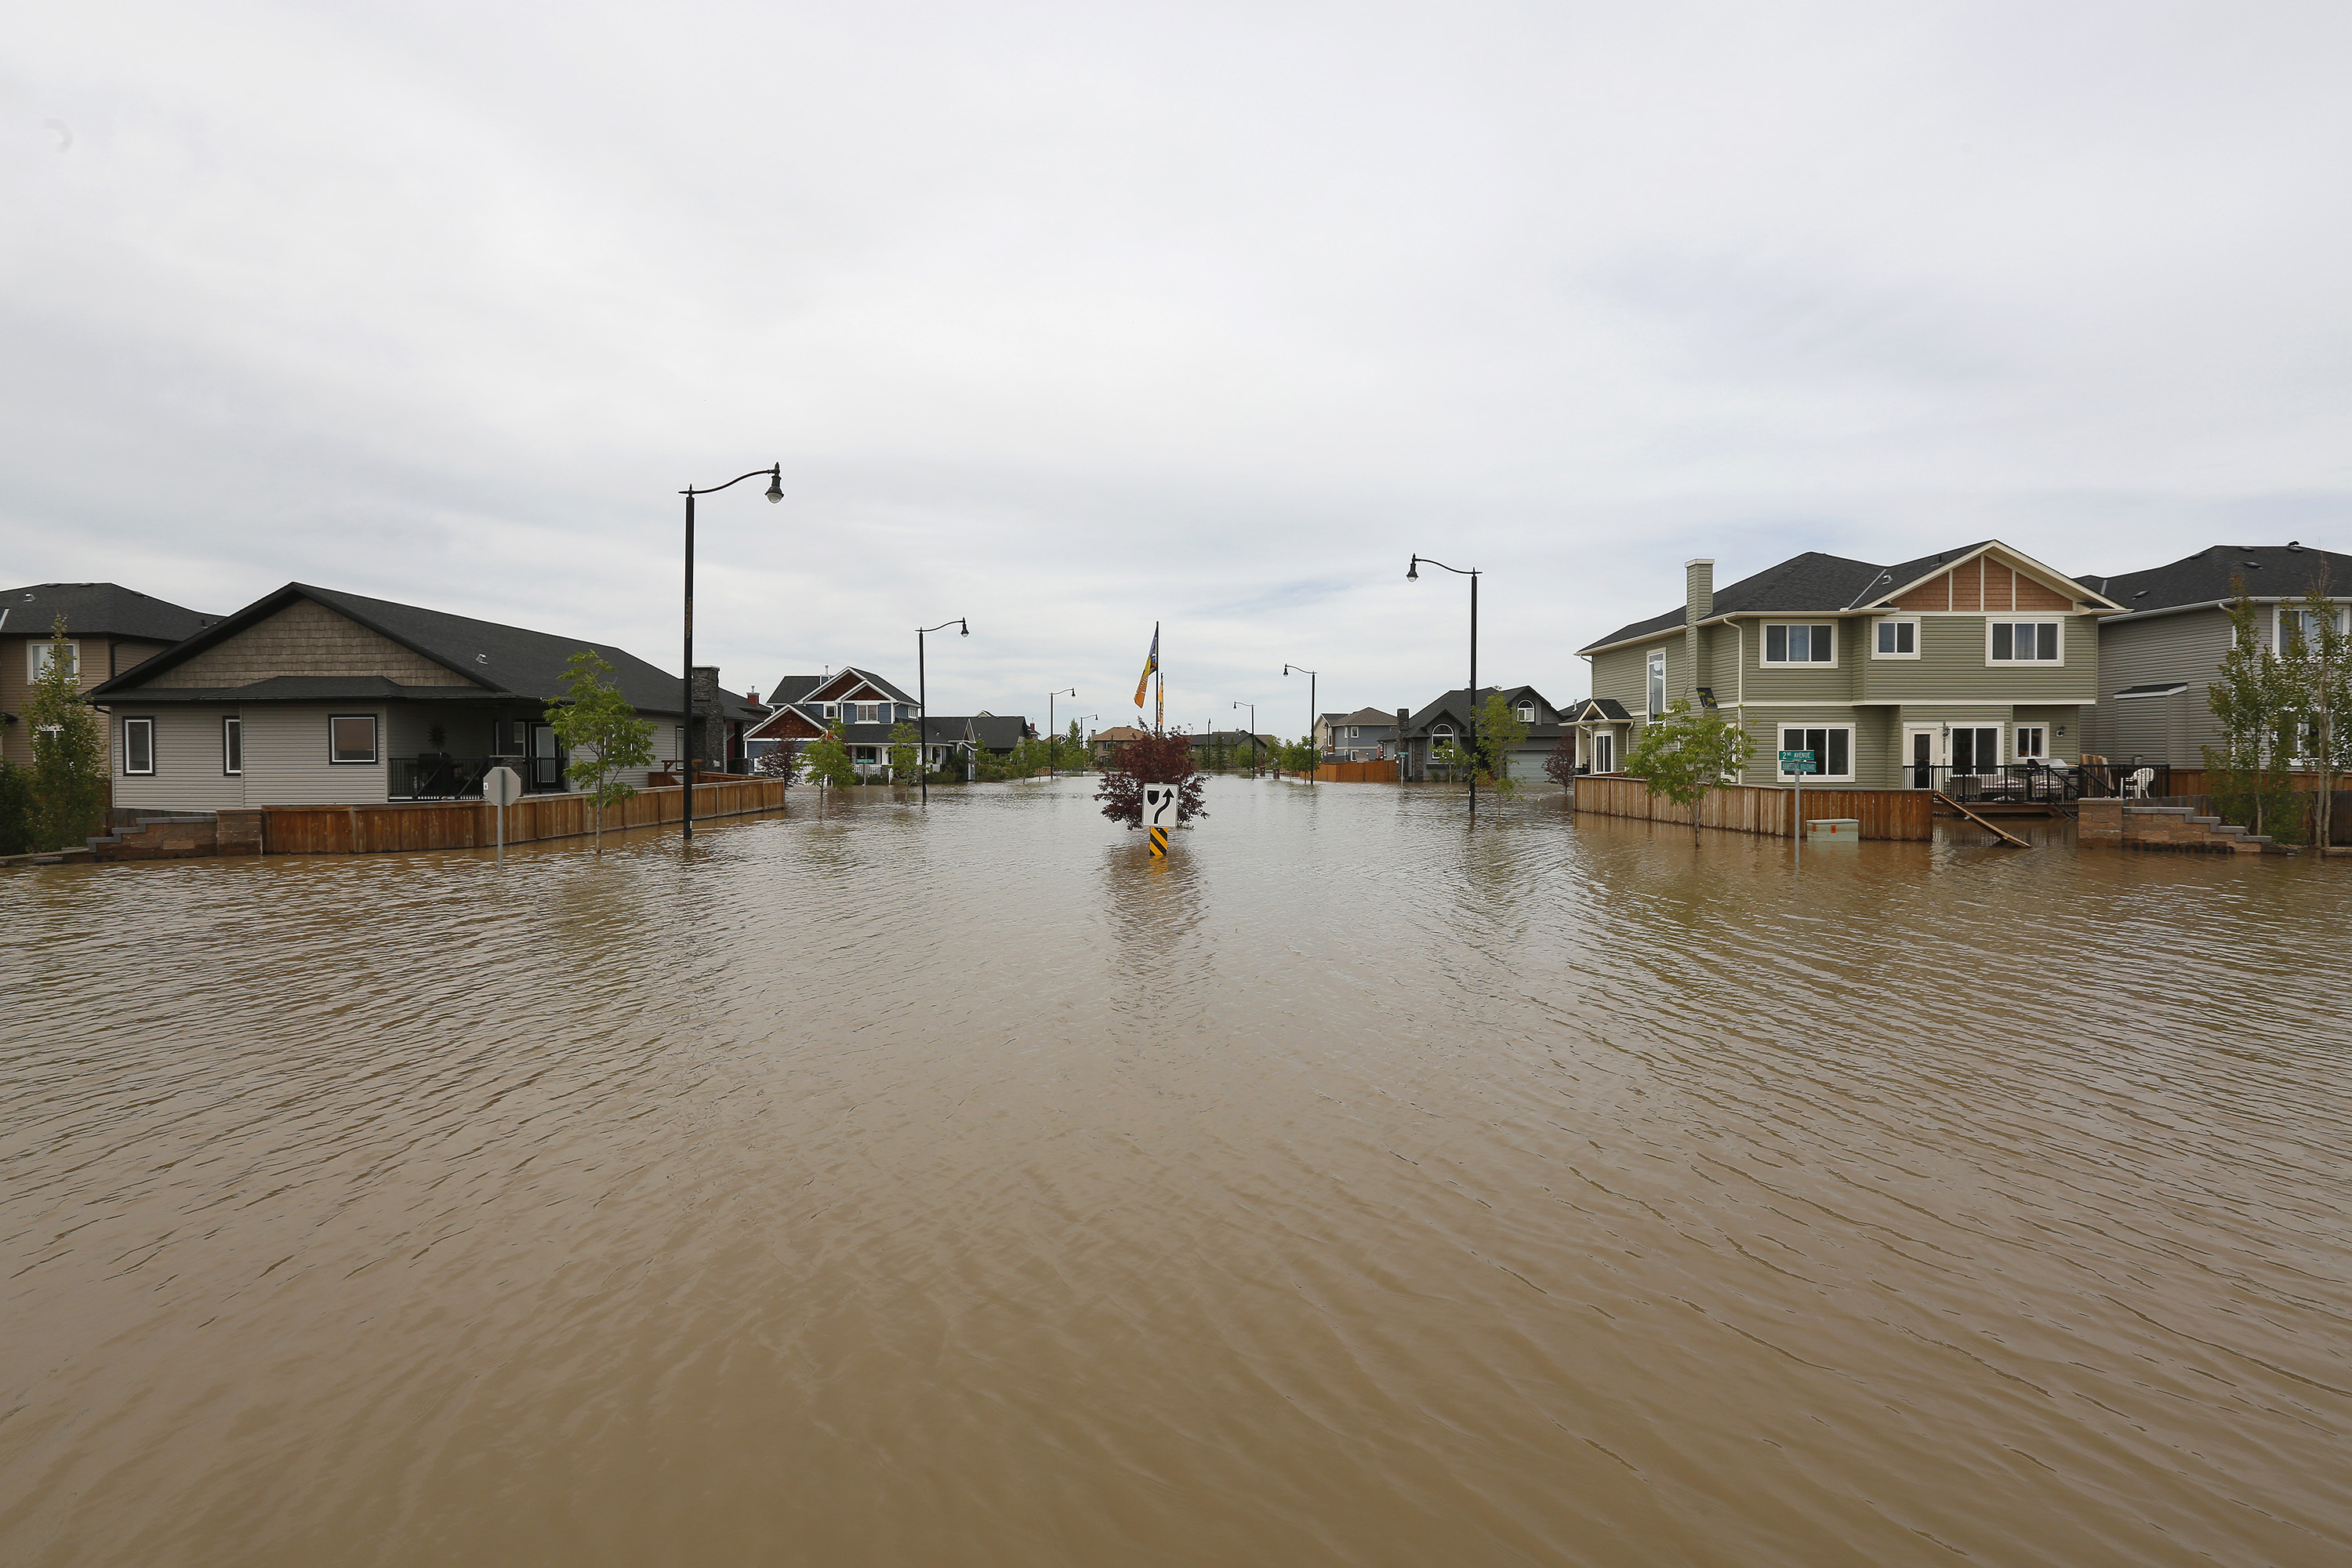 Home are still under water a week after major flooding hit High River, Alberta, June 29, 2013. REUTERS/Todd Korol